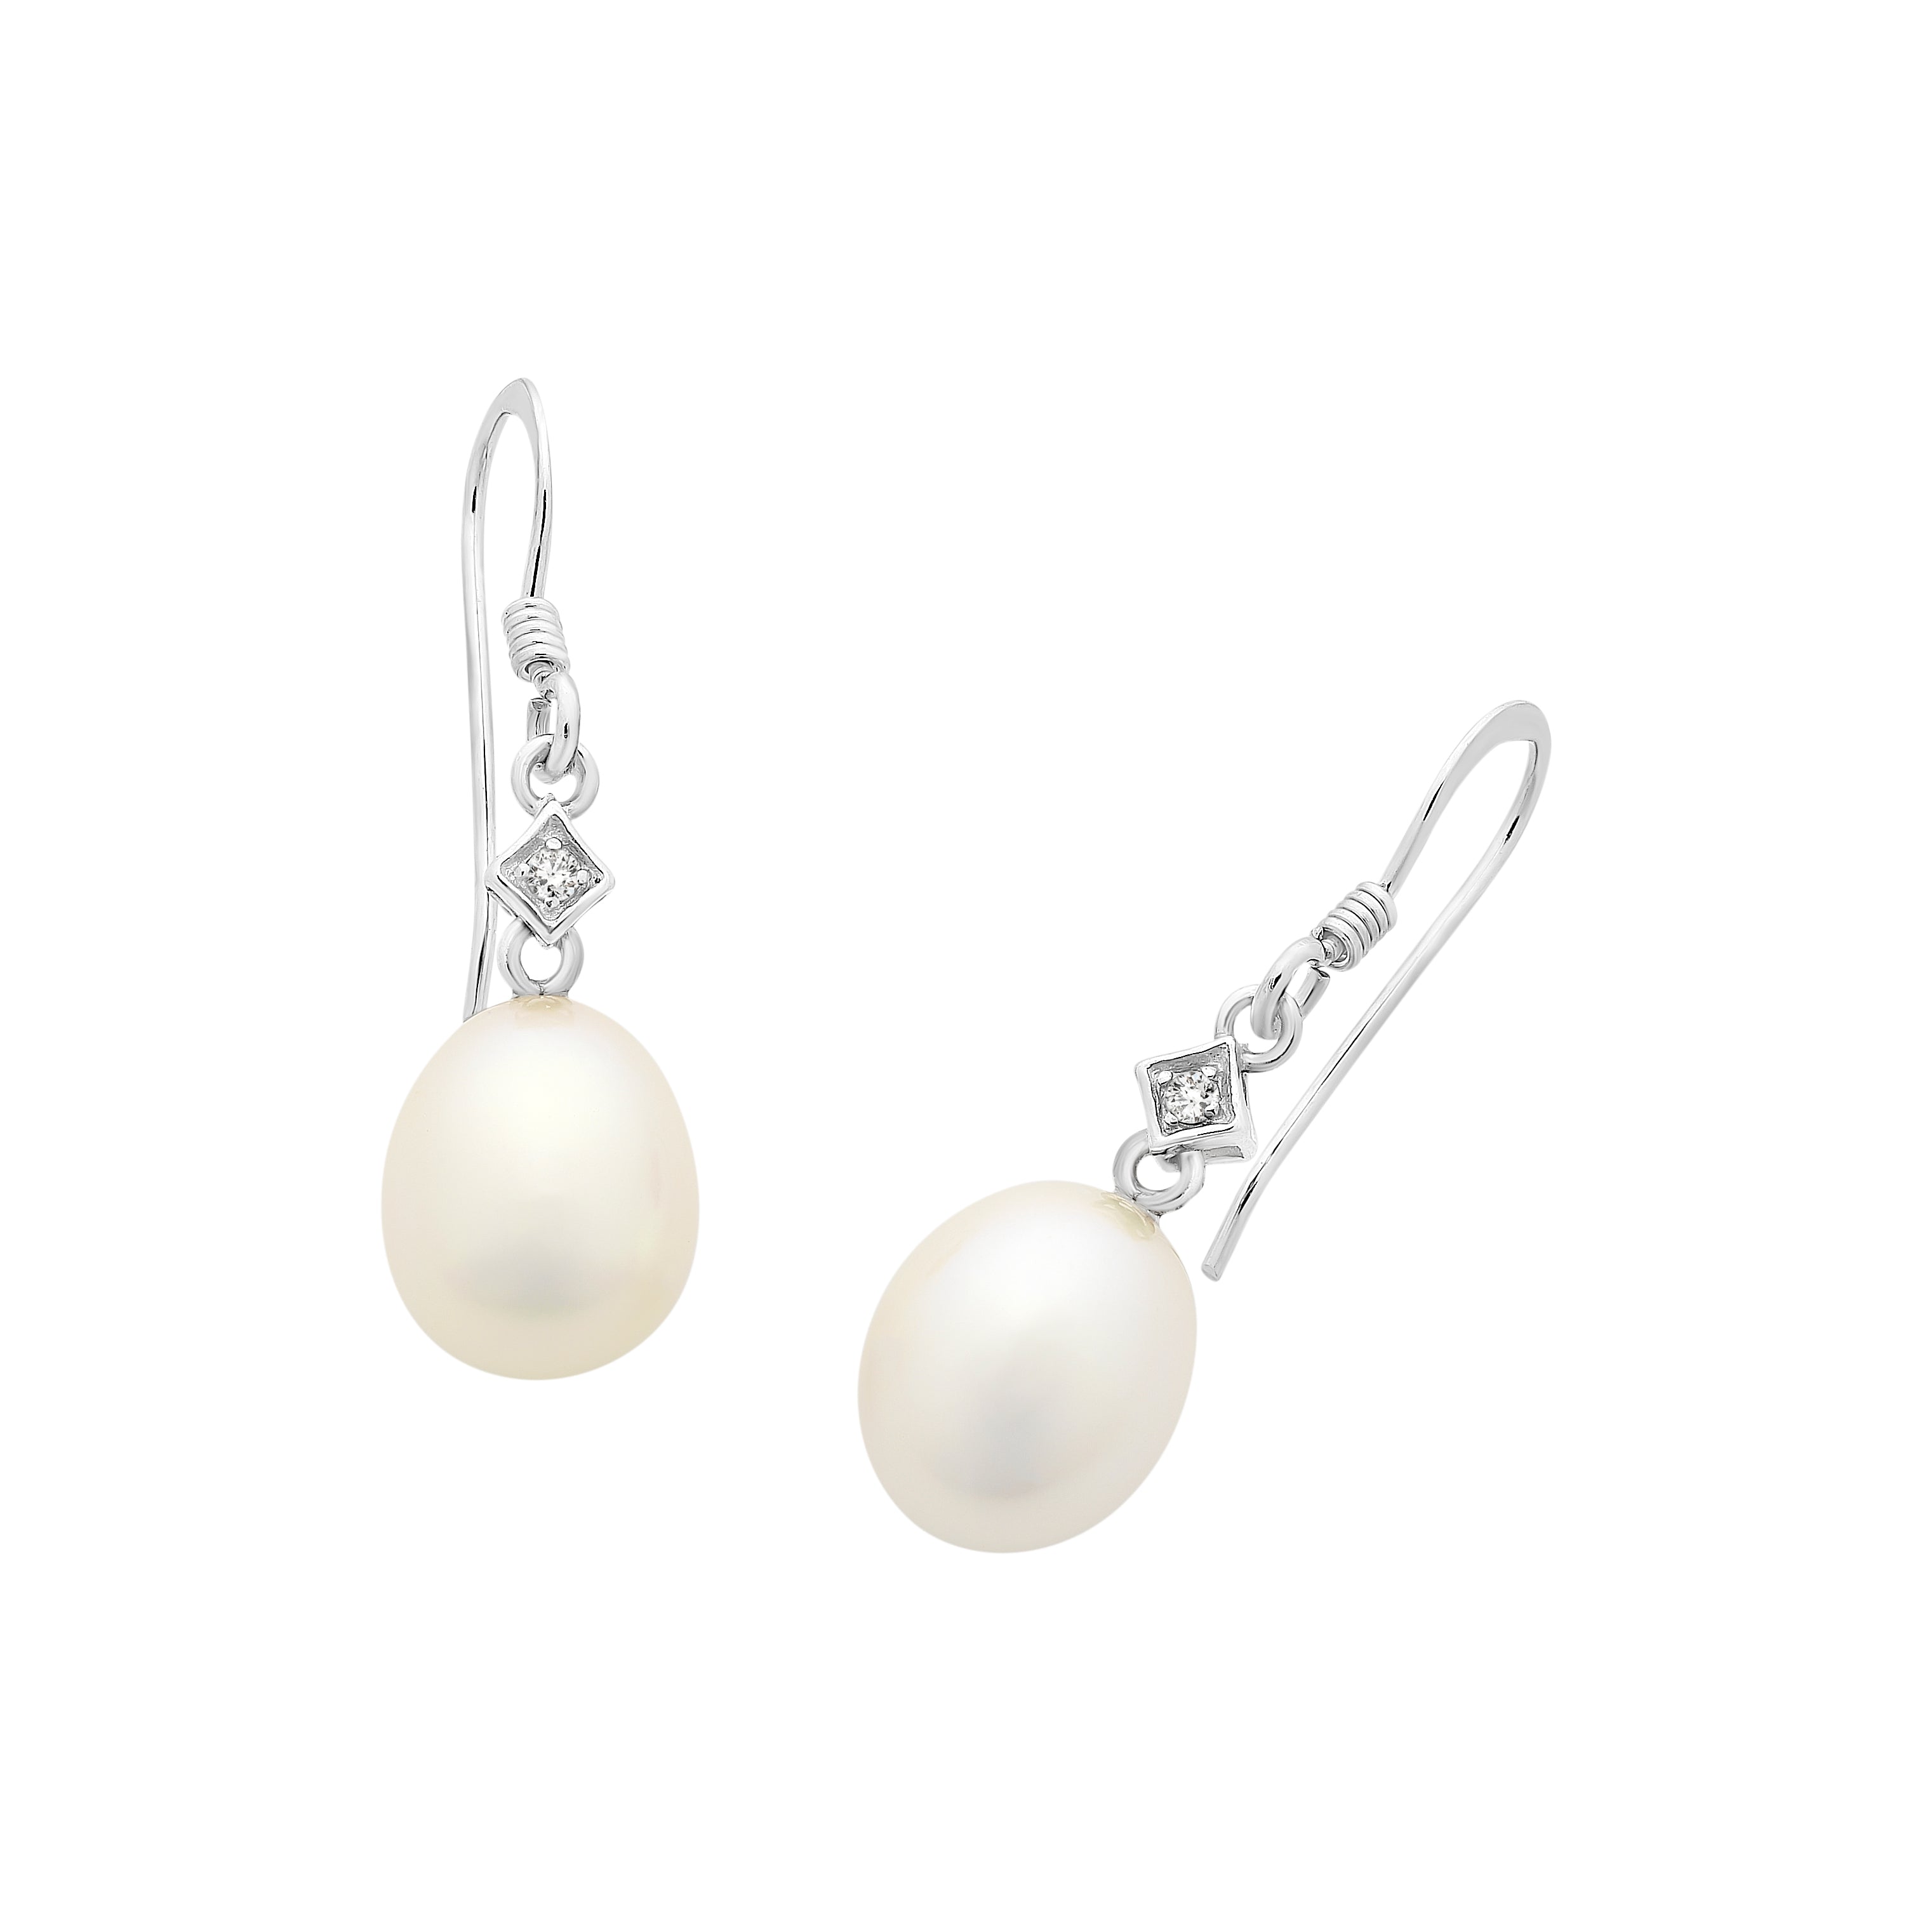 Sterling Silver Freshwater Pearl and Cubic Zirconia Earrings